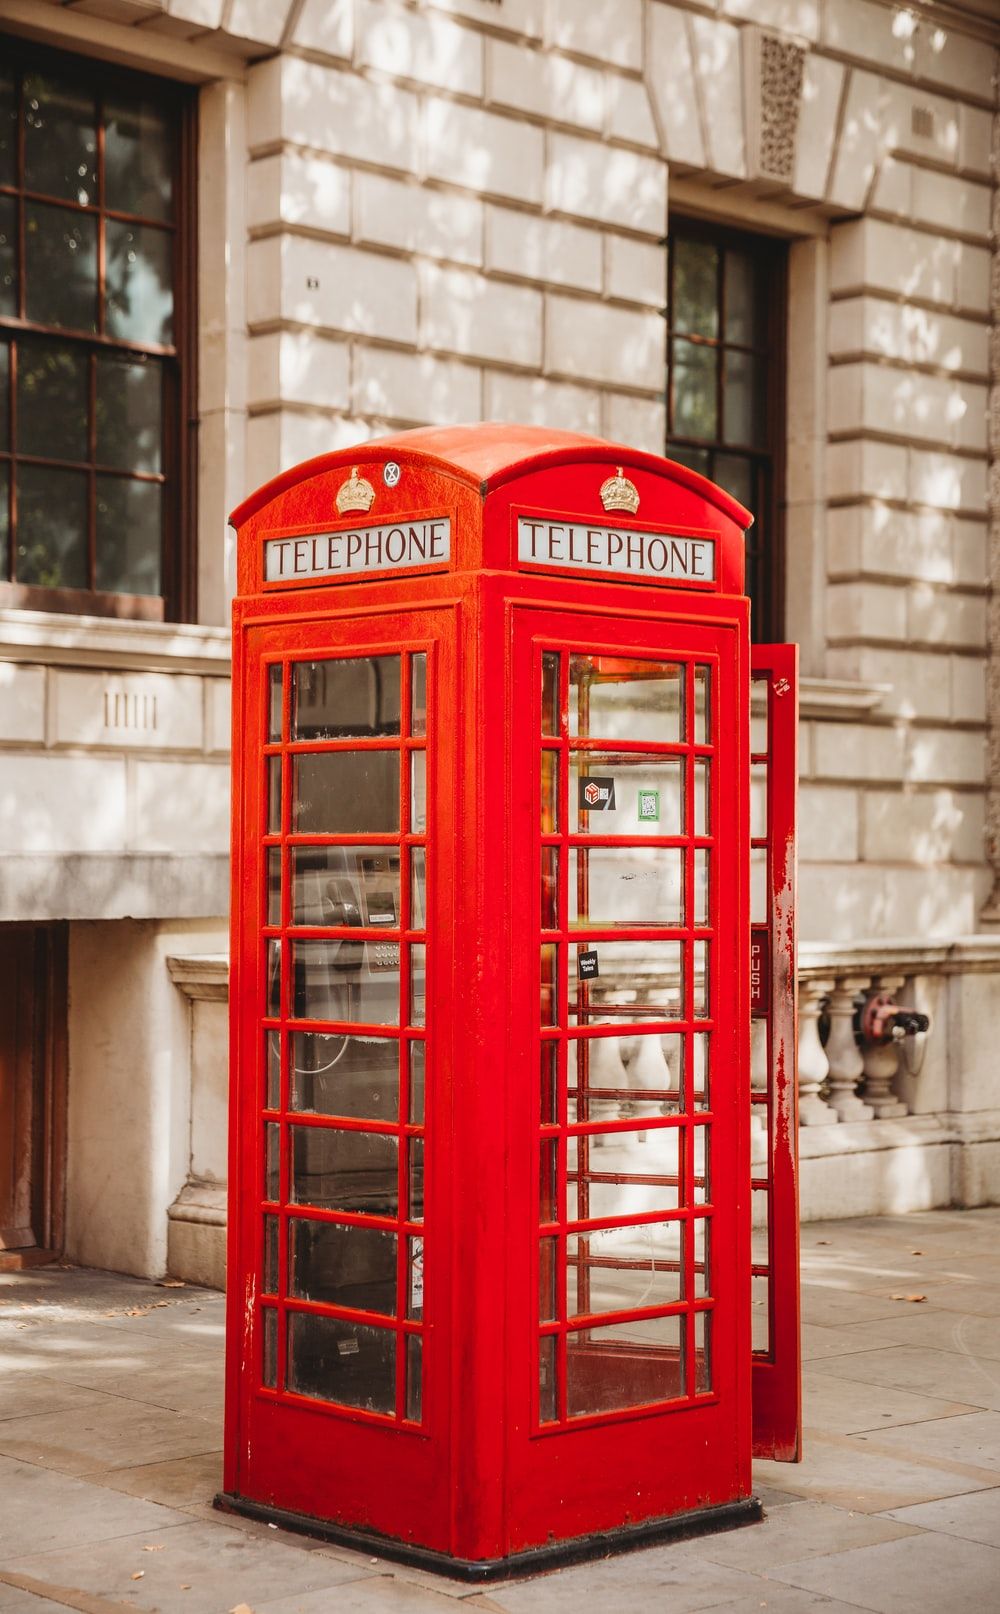 Phone Booth Picture. Download Free Image